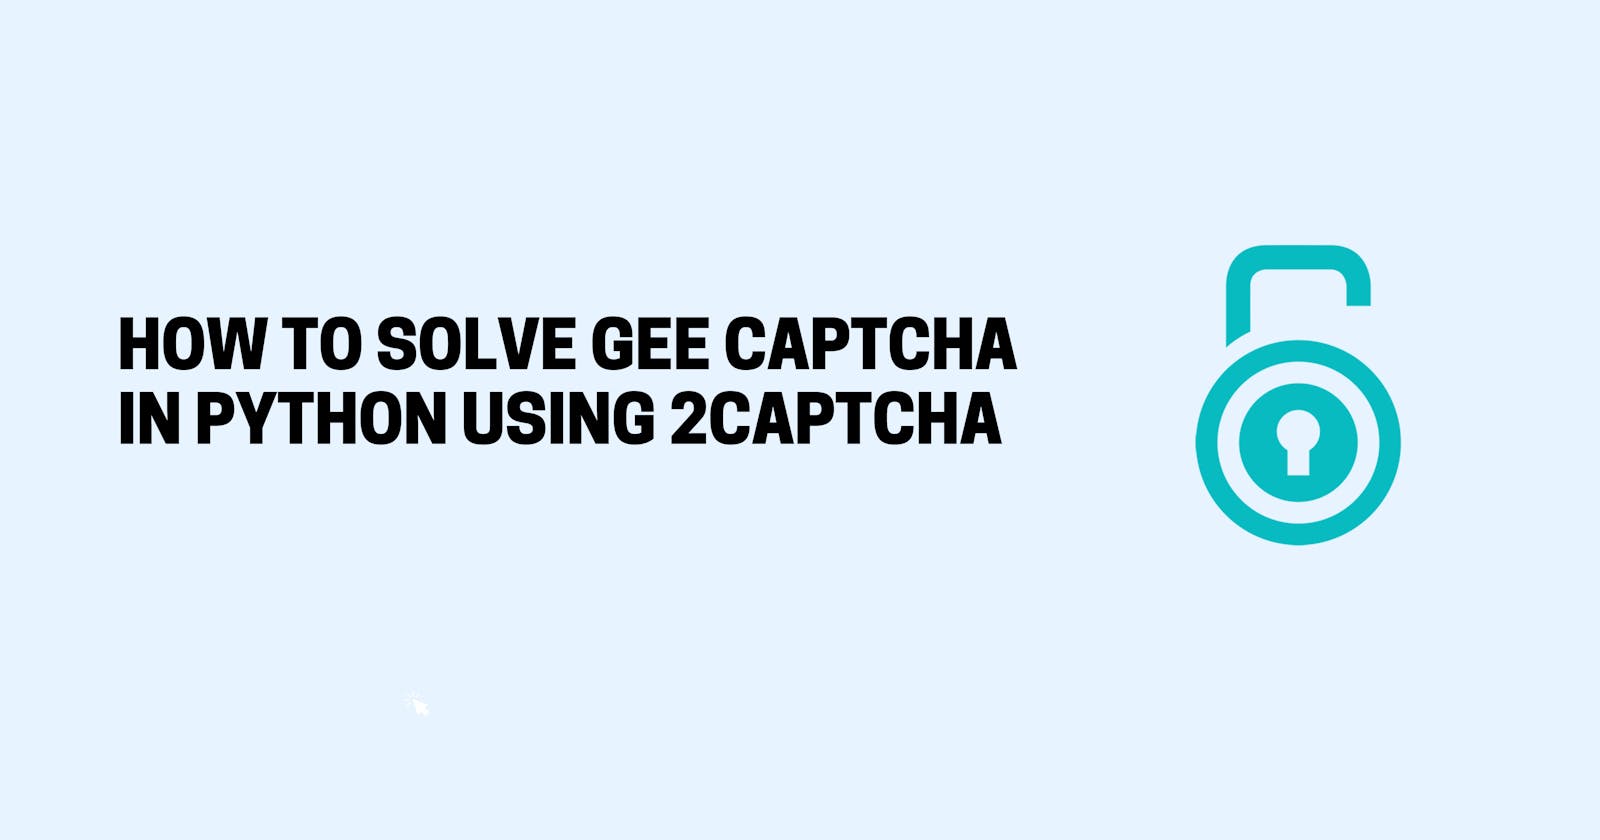 How To Solve Gee Captcha in Python Using 2Captcha